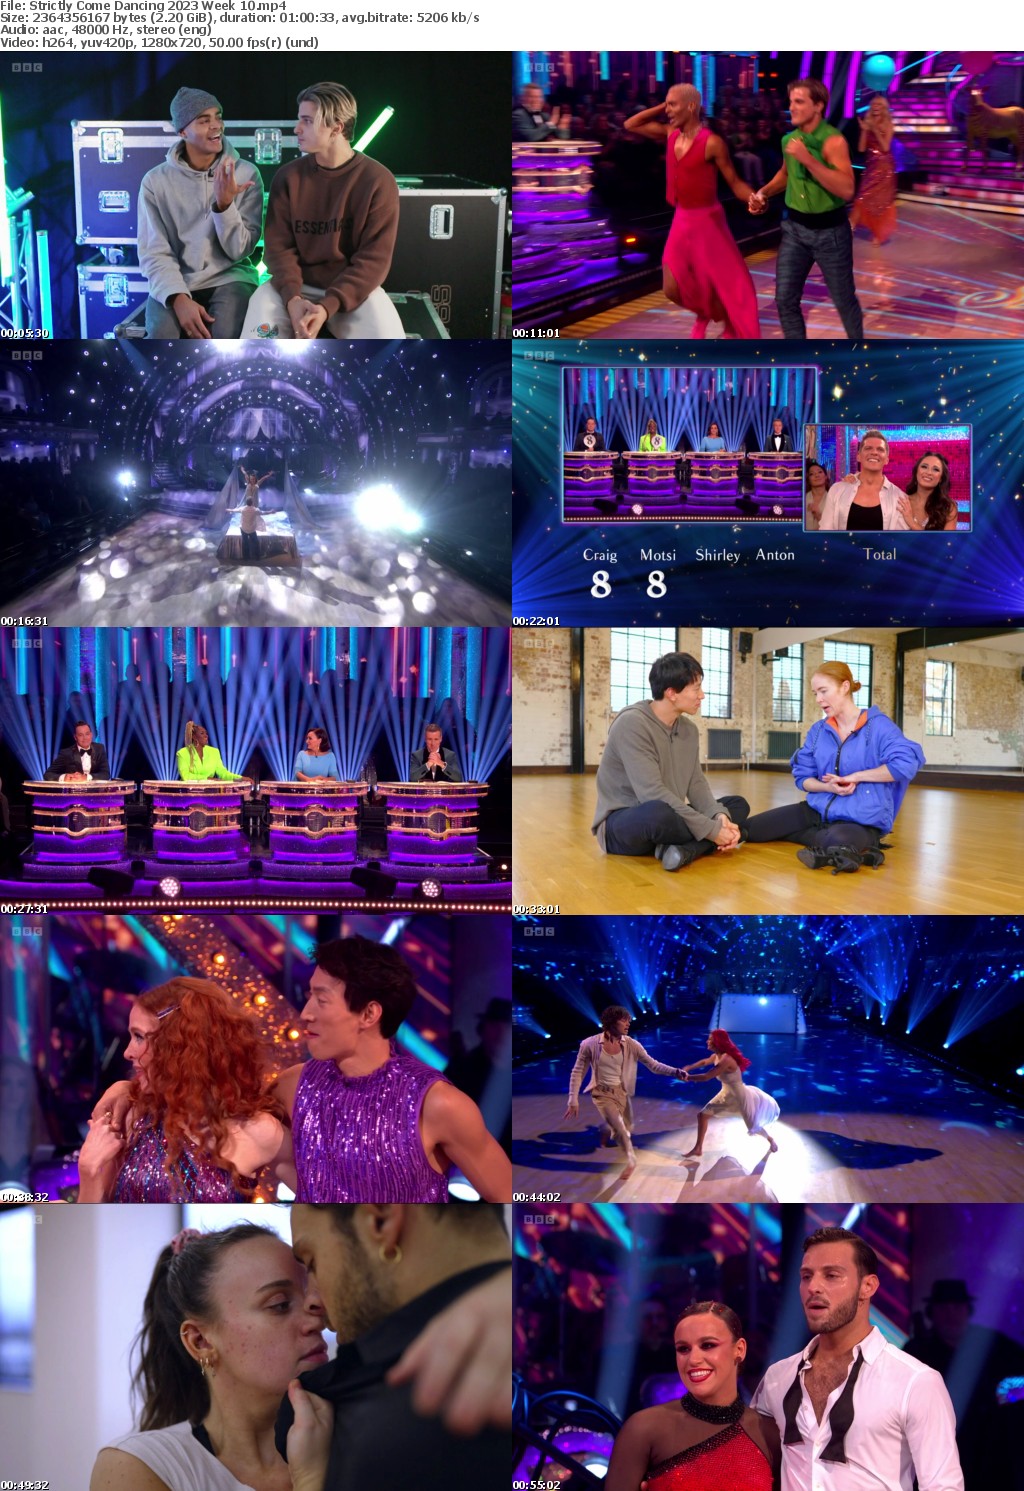 Strictly Come Dancing 2023 Week 10 (1280x720p HD, 50fps, soft Eng subs)